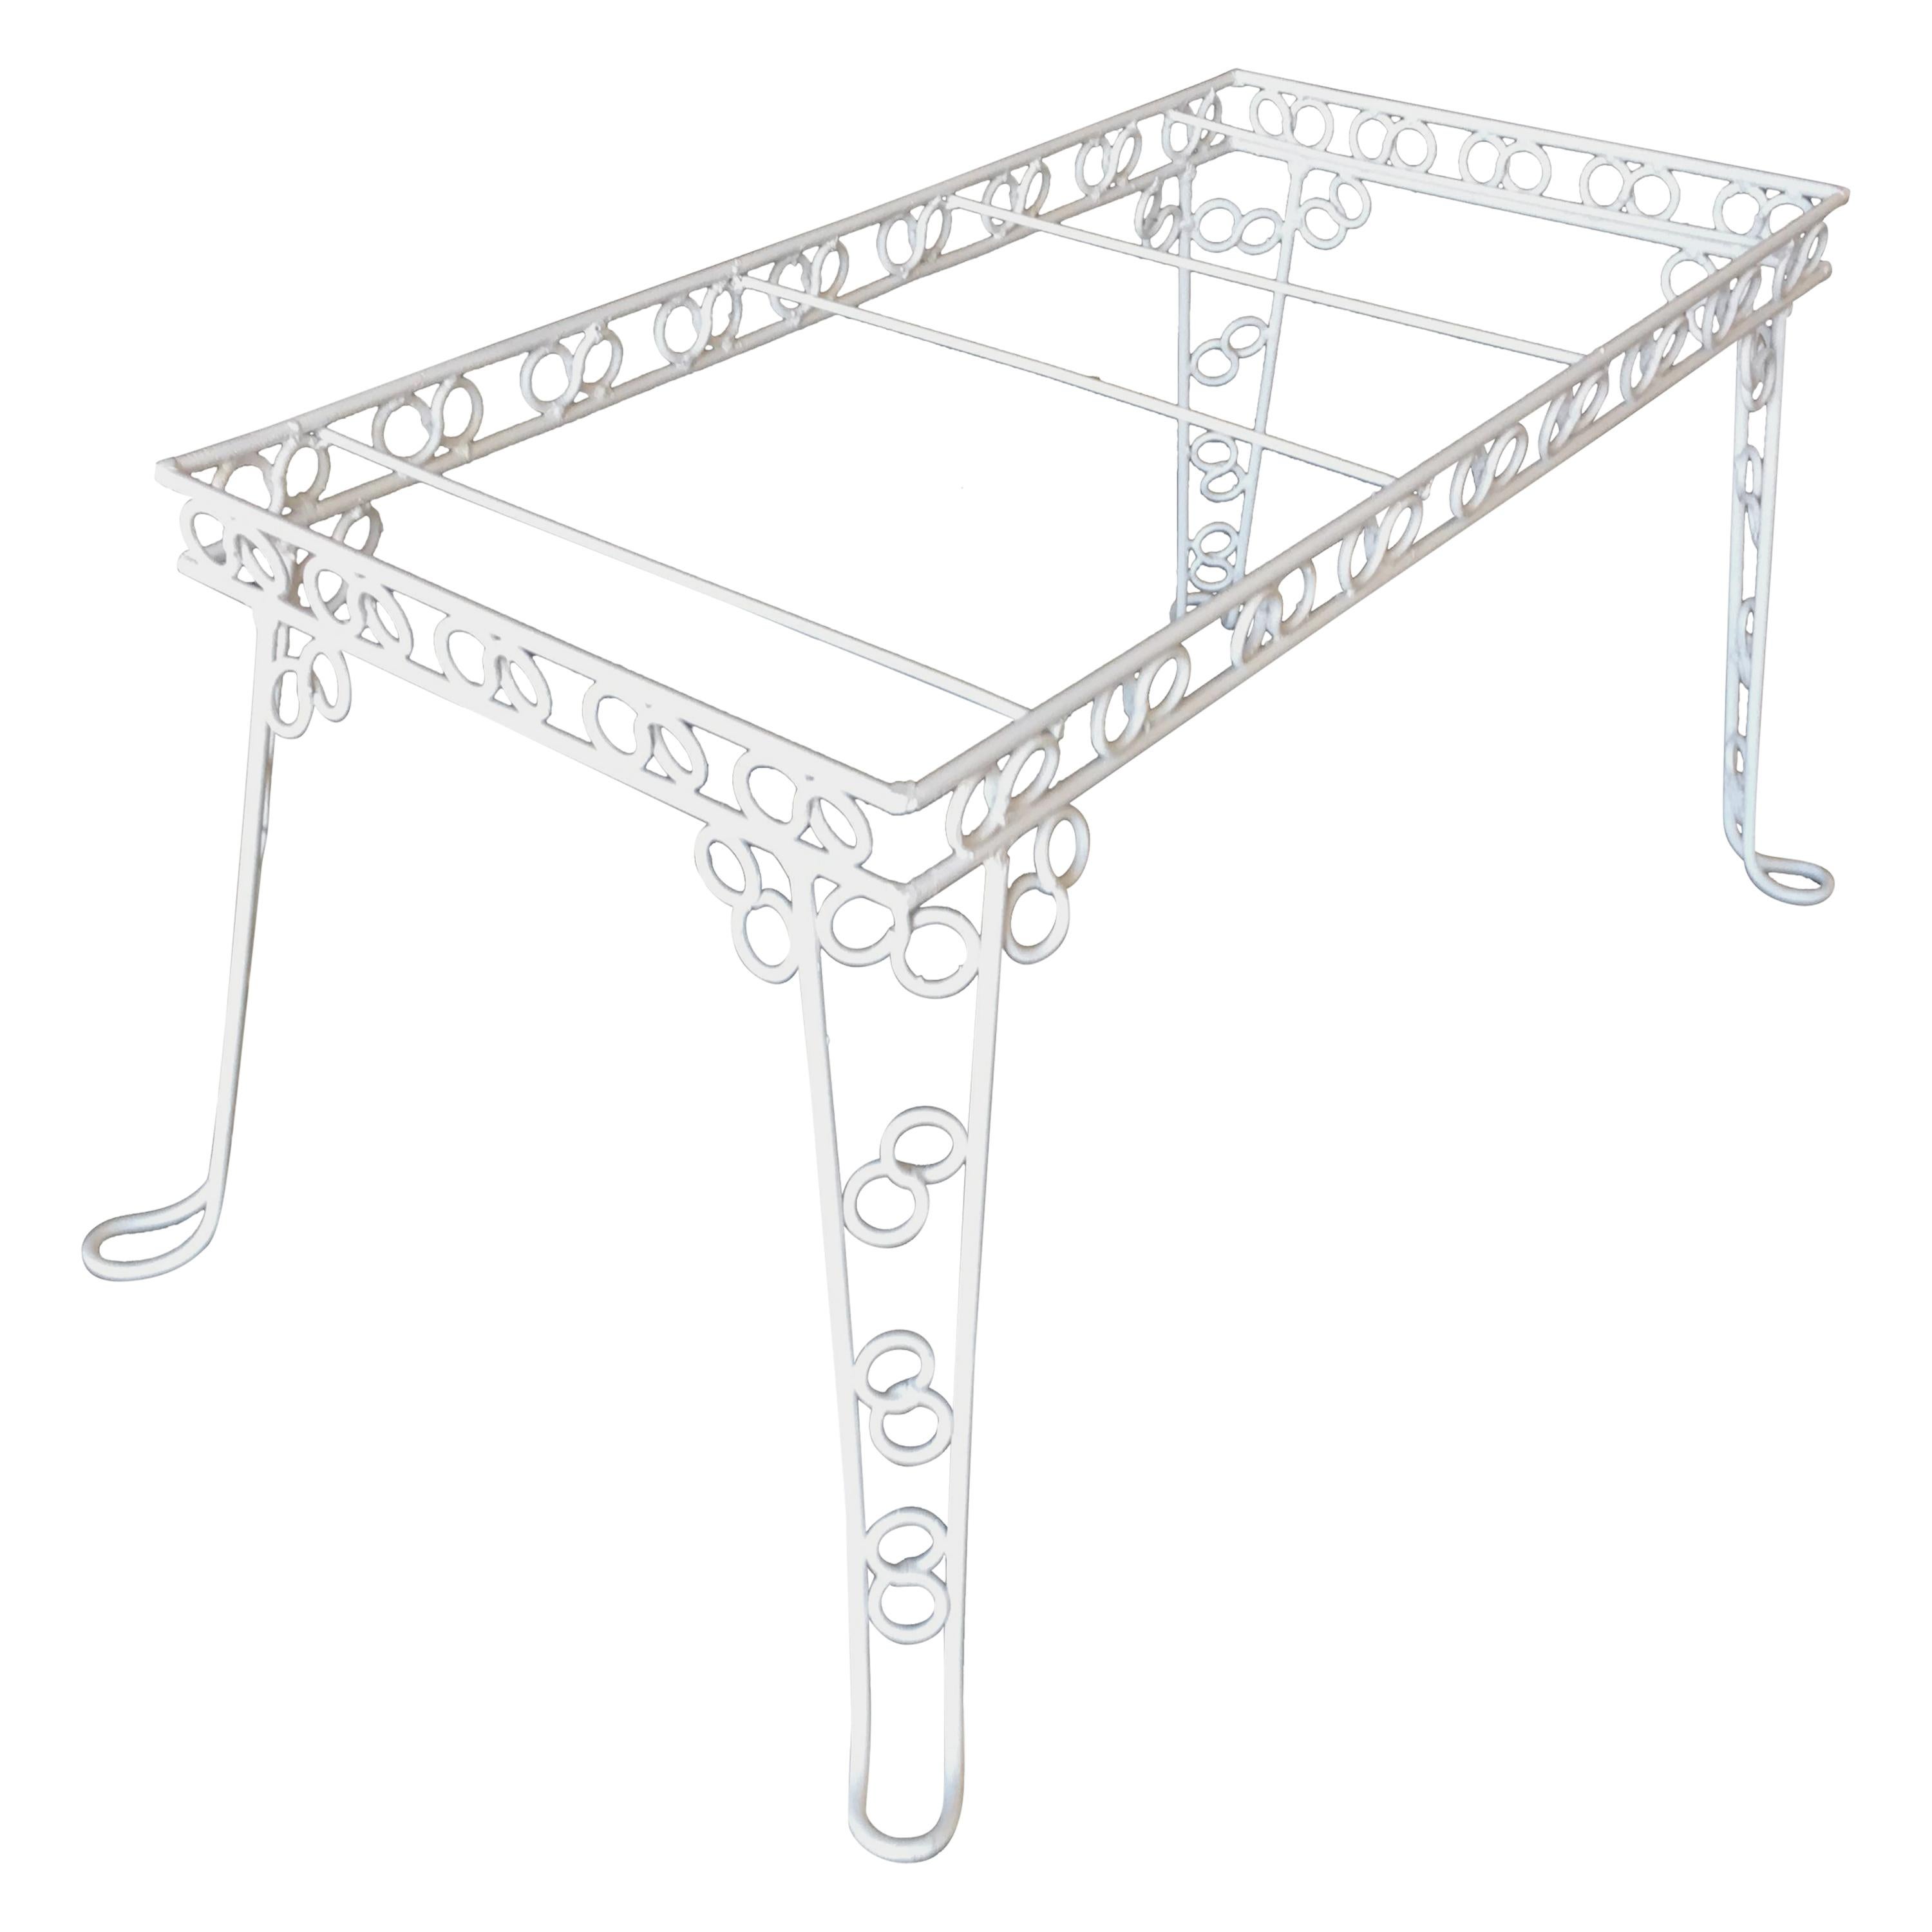 Custom 4 Person Outdoor "Circle 8" Iron Table with Glass Top